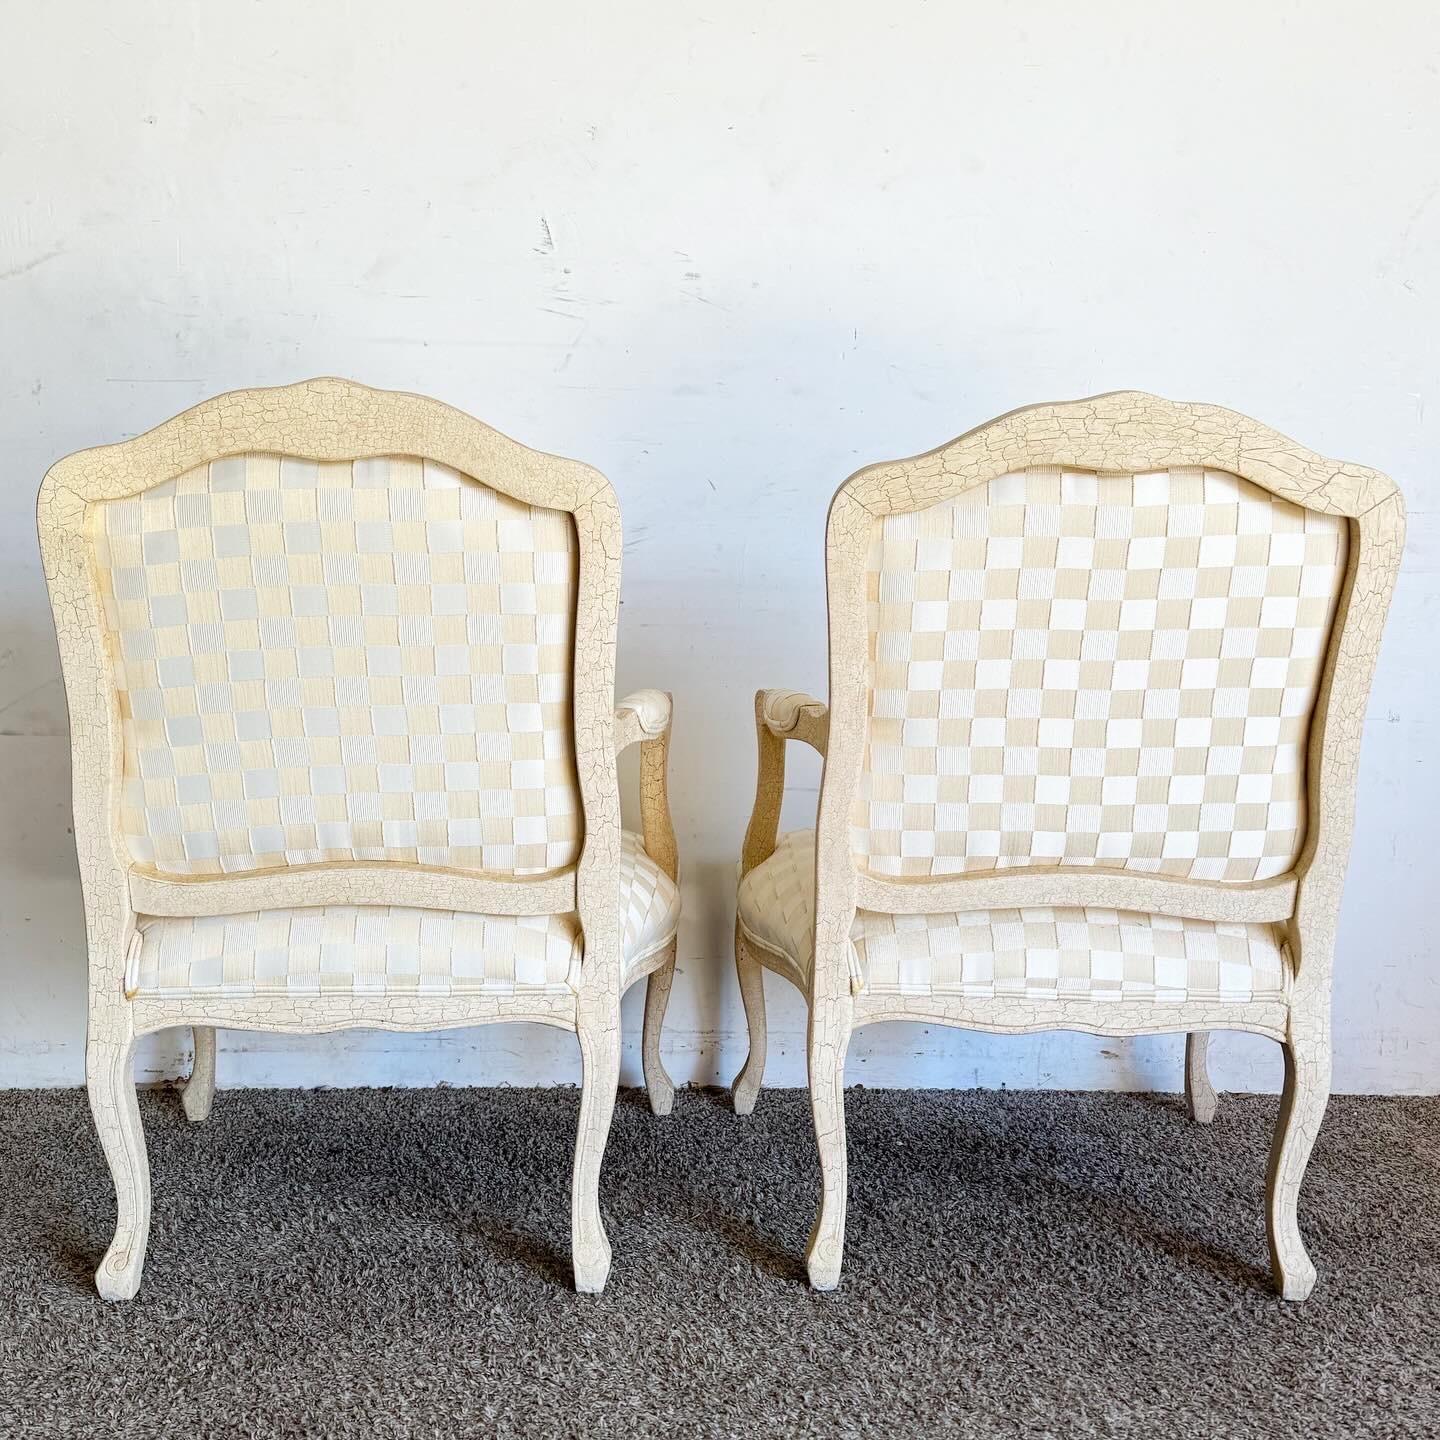 Late 20th Century Vintage Regency Cream Crackled Finish Arm Chairs - a Pair For Sale